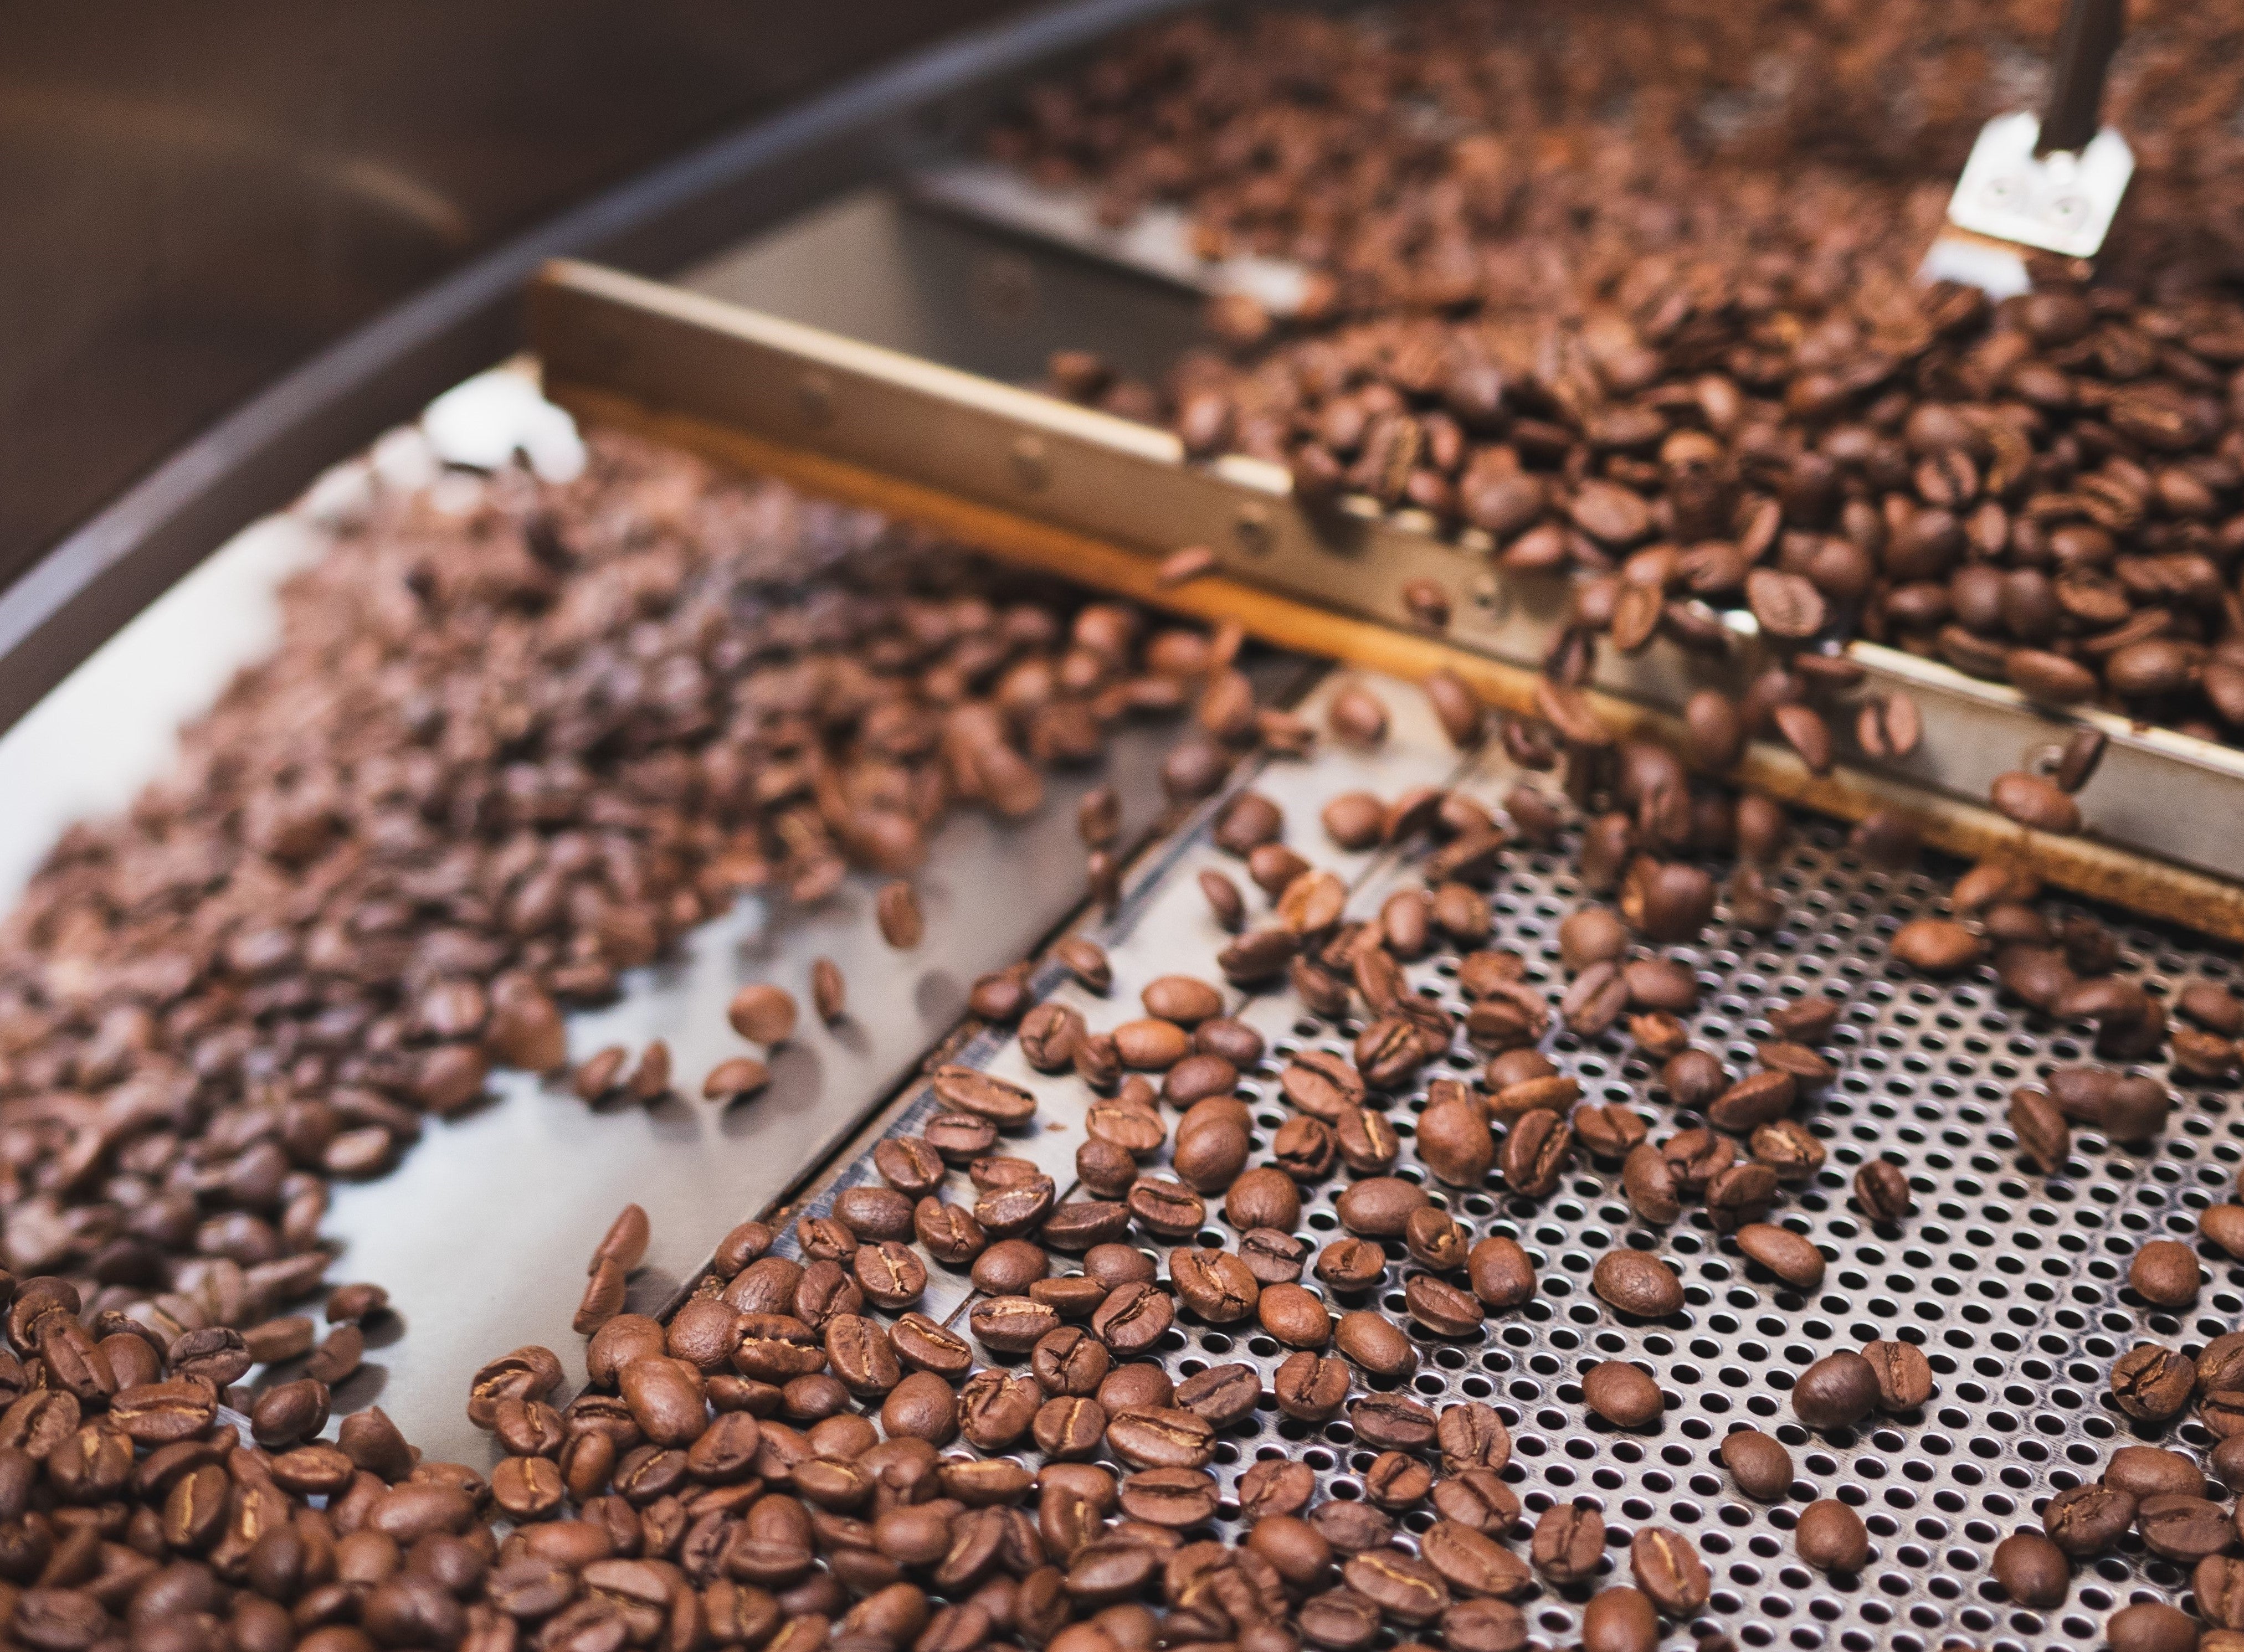 Roasted coffee beans in a cooling tray